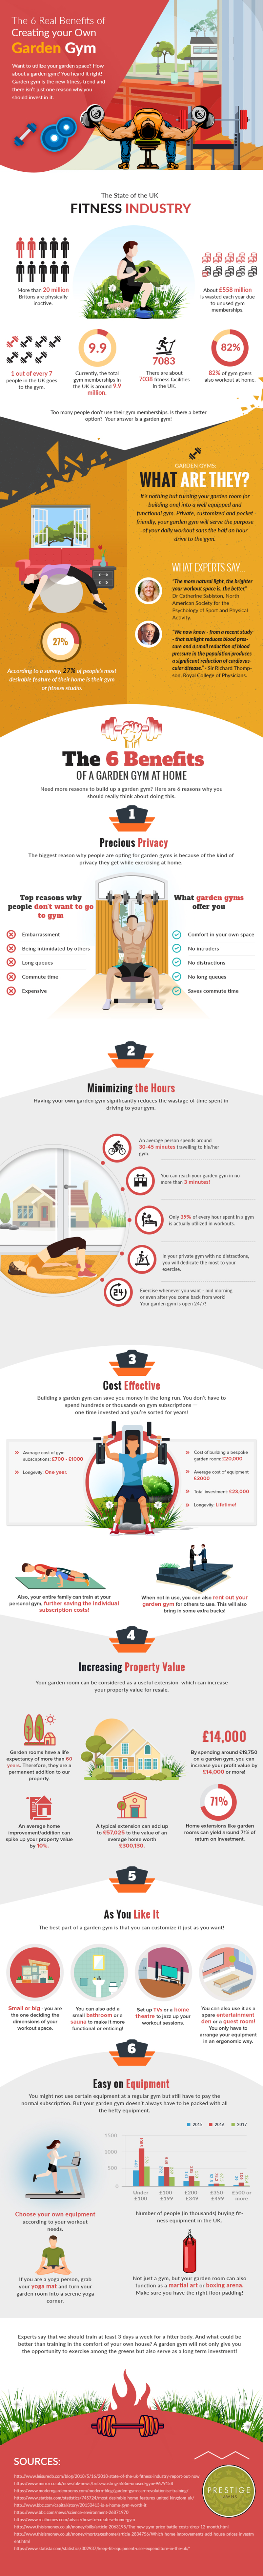 Infographic exploring the benefits of building a garden gym building